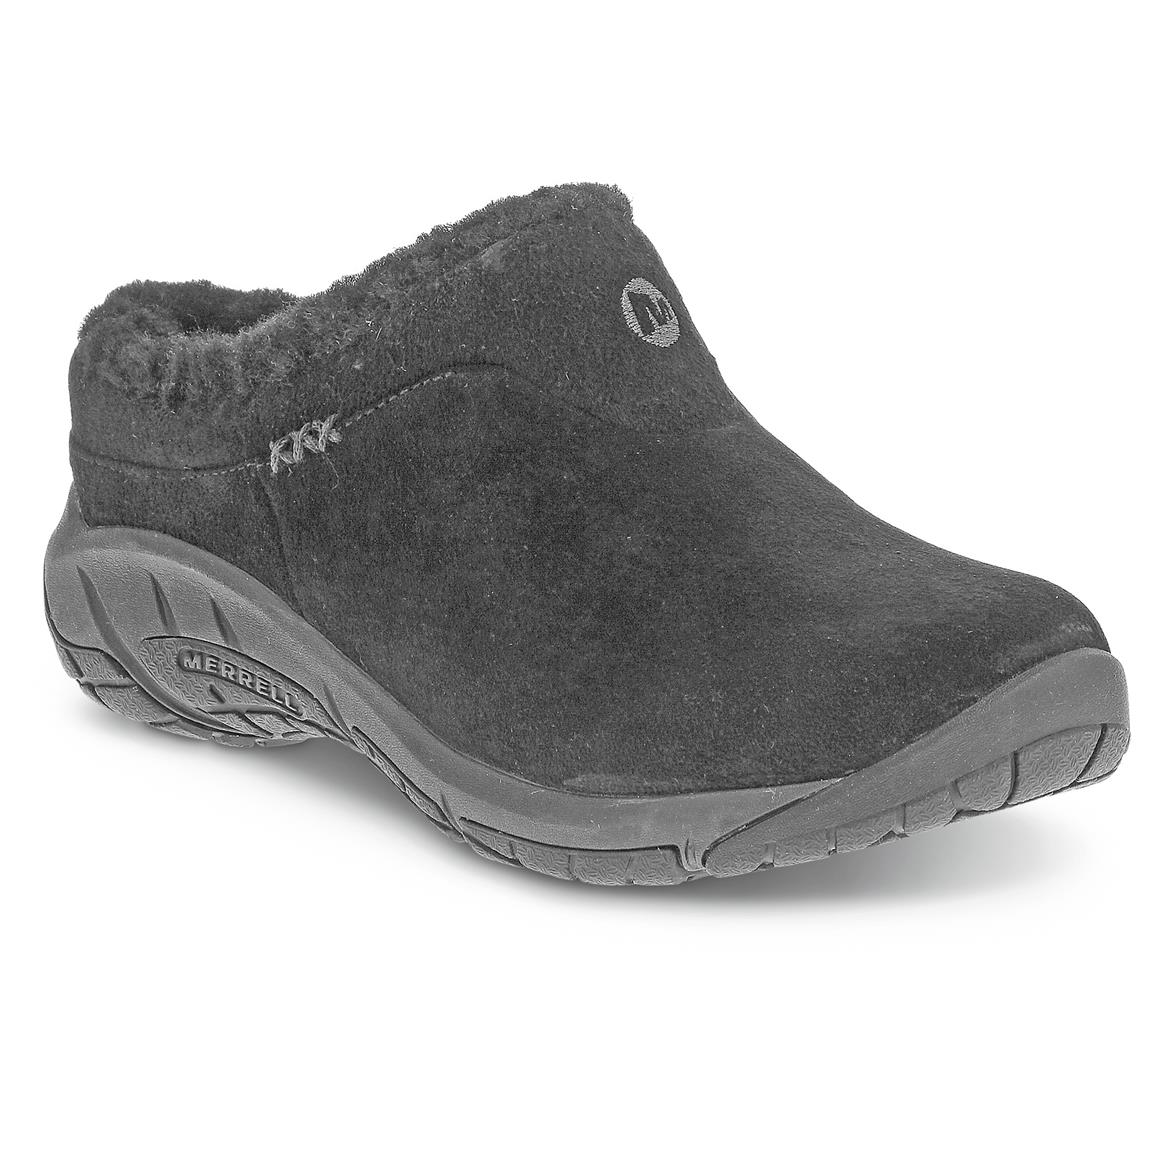 Merrell Women's Ice Moc - 640118, Winter & Snow Boots at Sportsman's Guide